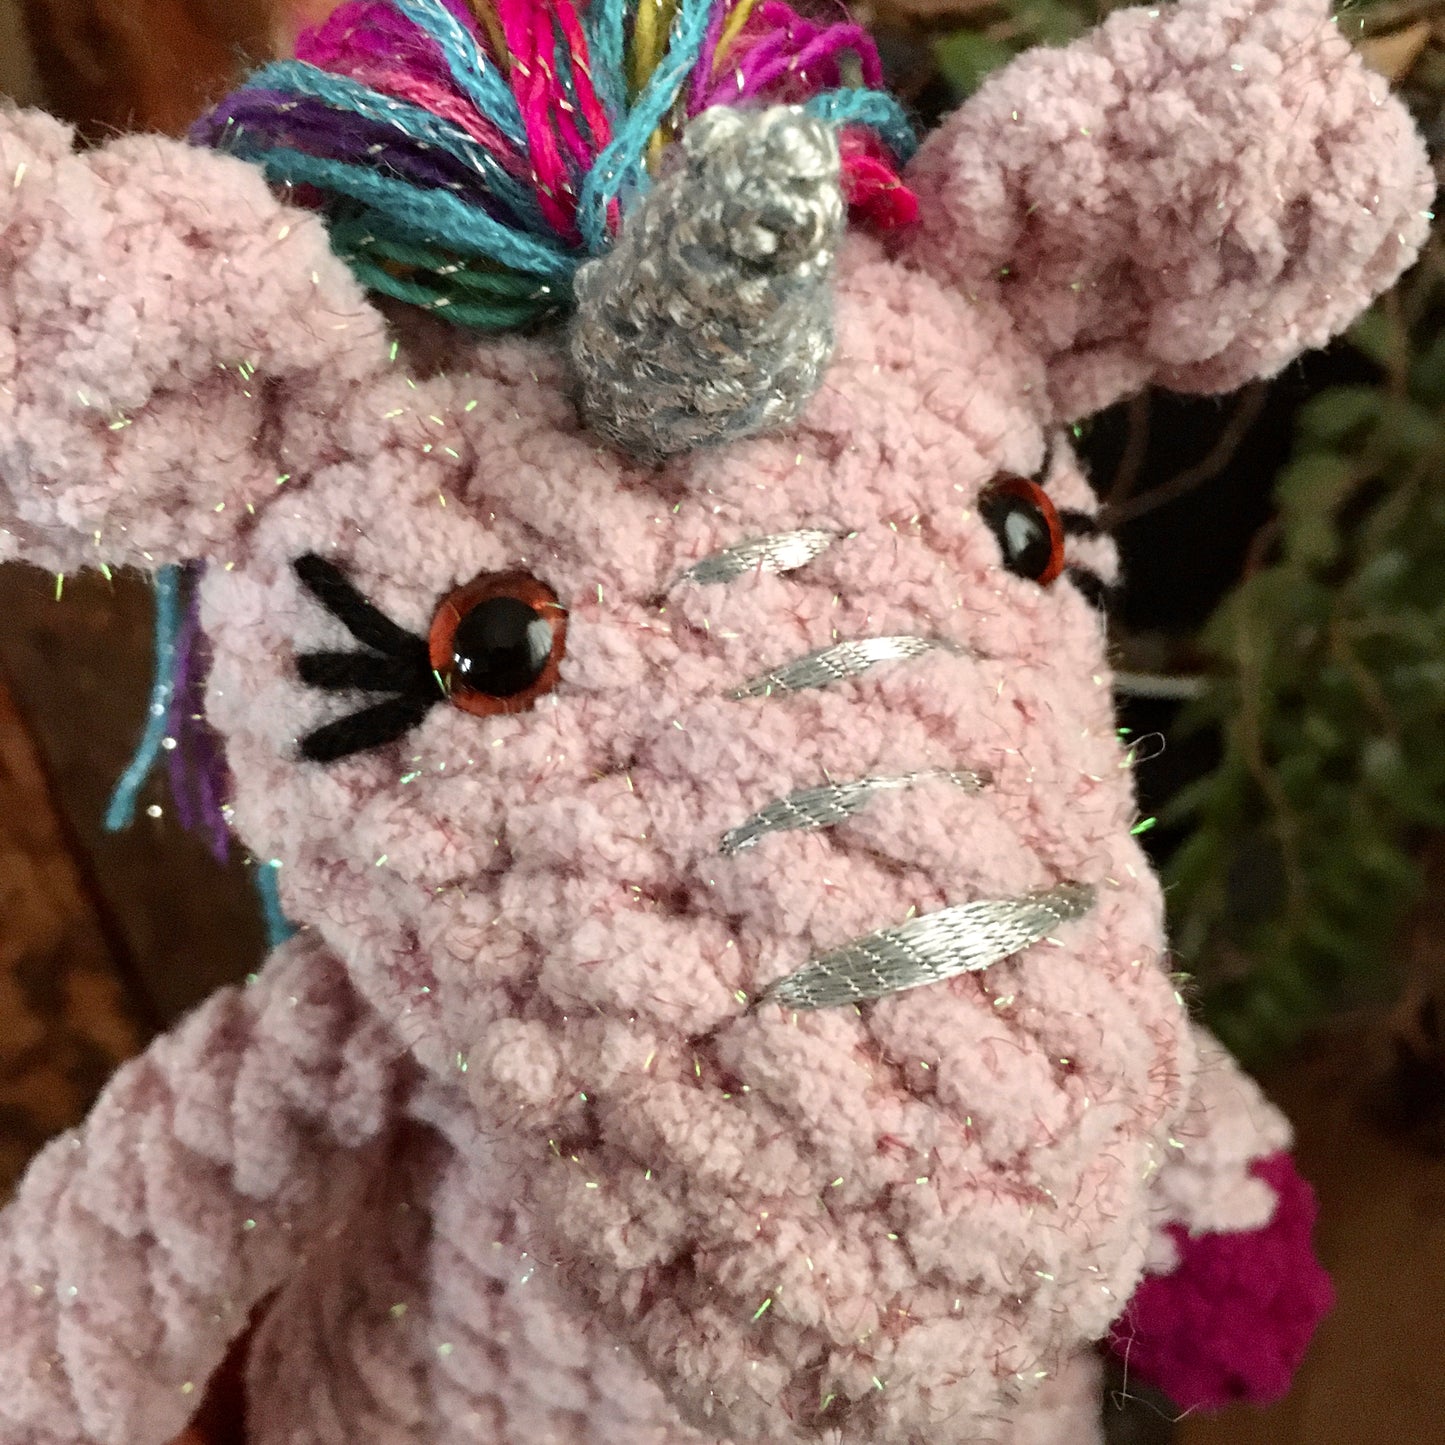 THE LITTLE UNICORN in colors bling-bling Pink and fuchsia